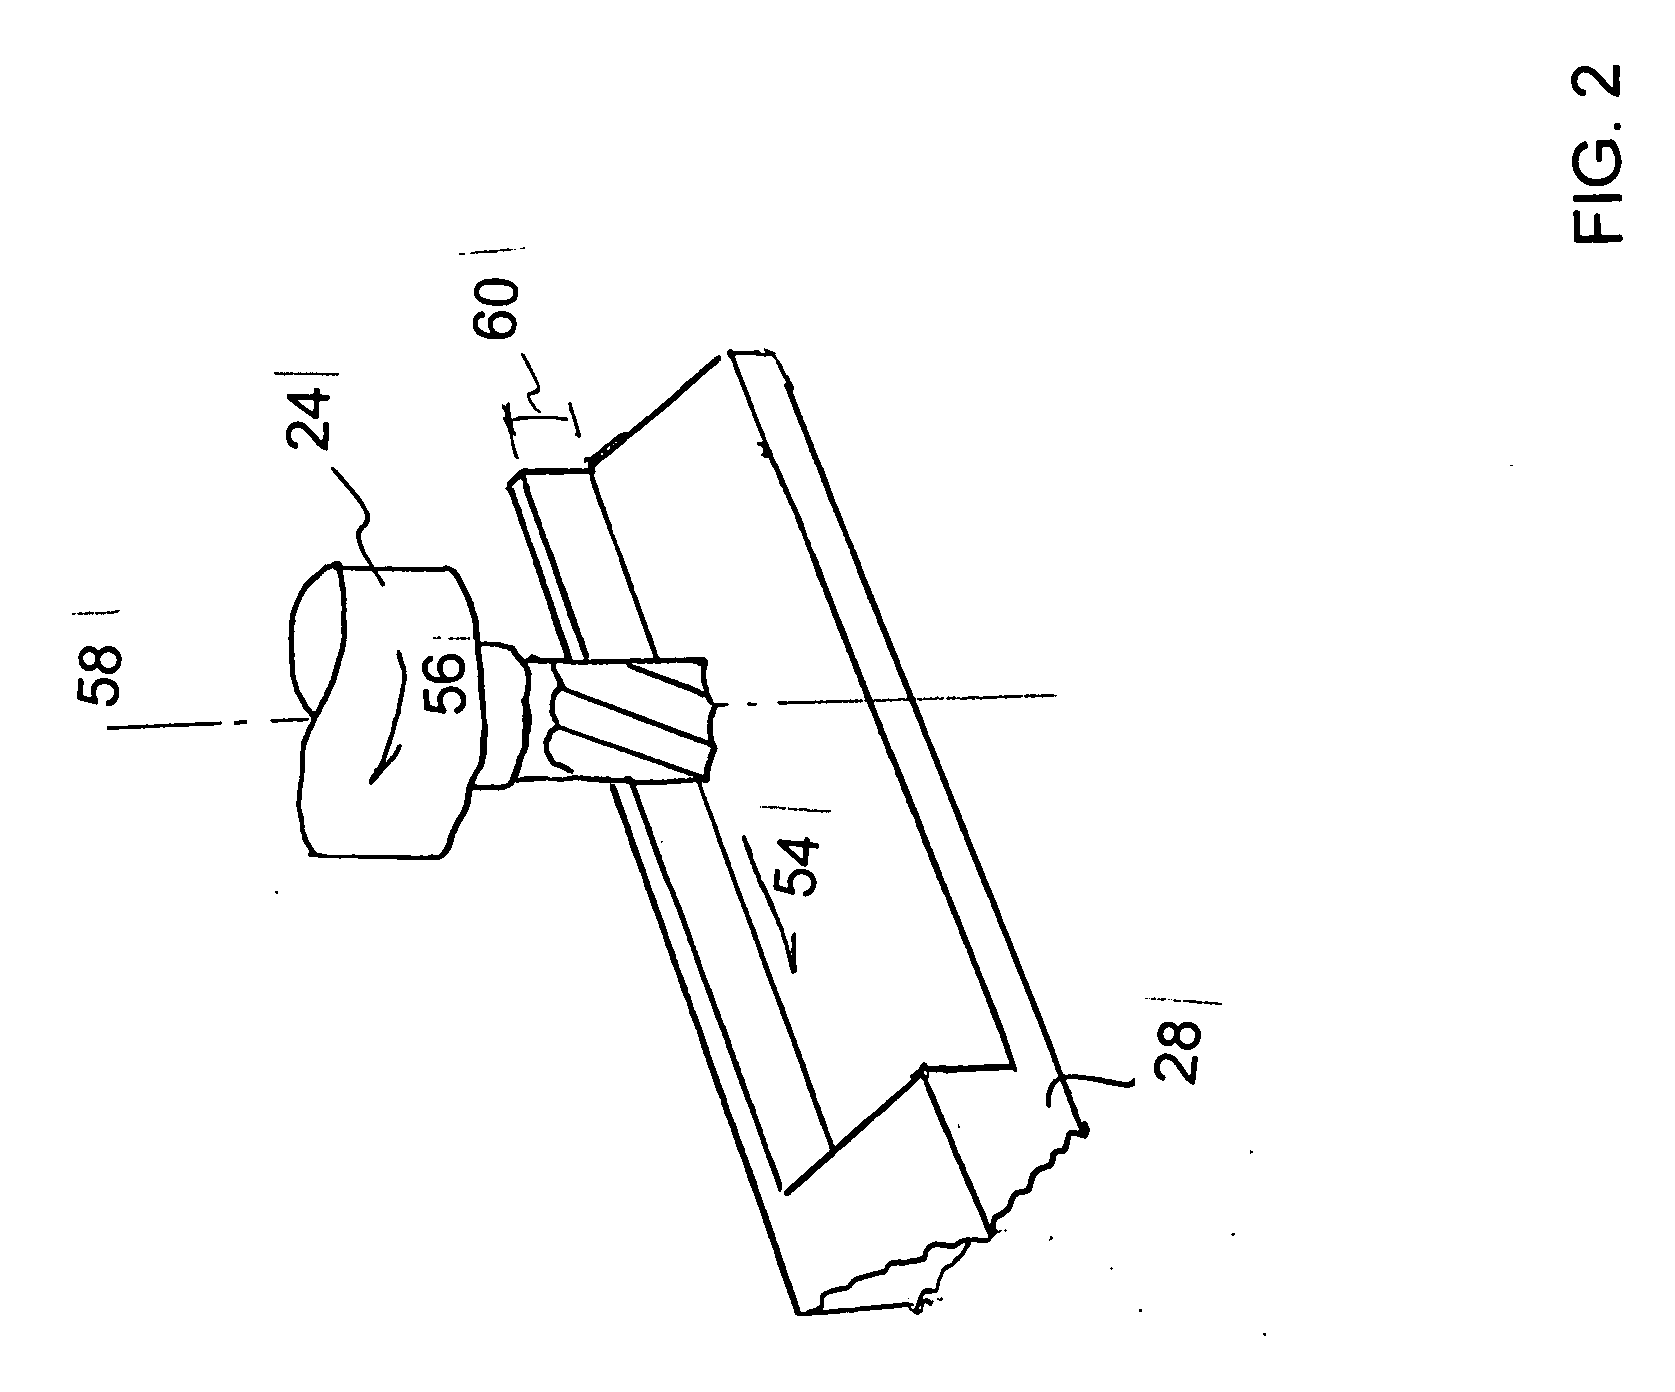 Method to measure tool wear from process model parameters